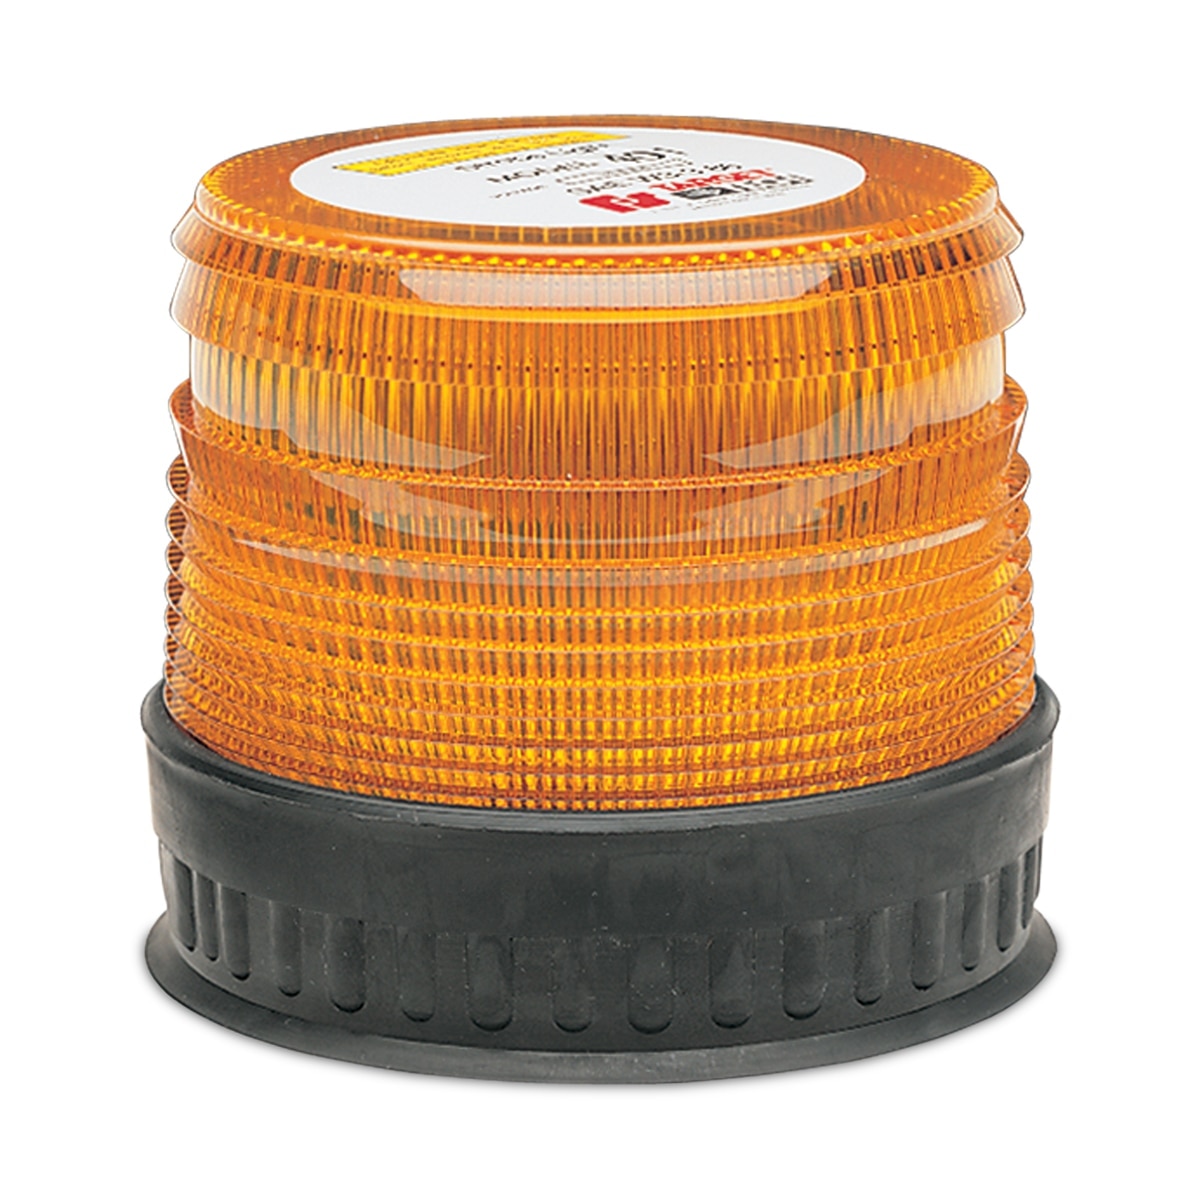 Class 2 Federal Signal 420222-02 651 LED Utility Beacon Permanent Mount with Branch Guard and Amber Dome 